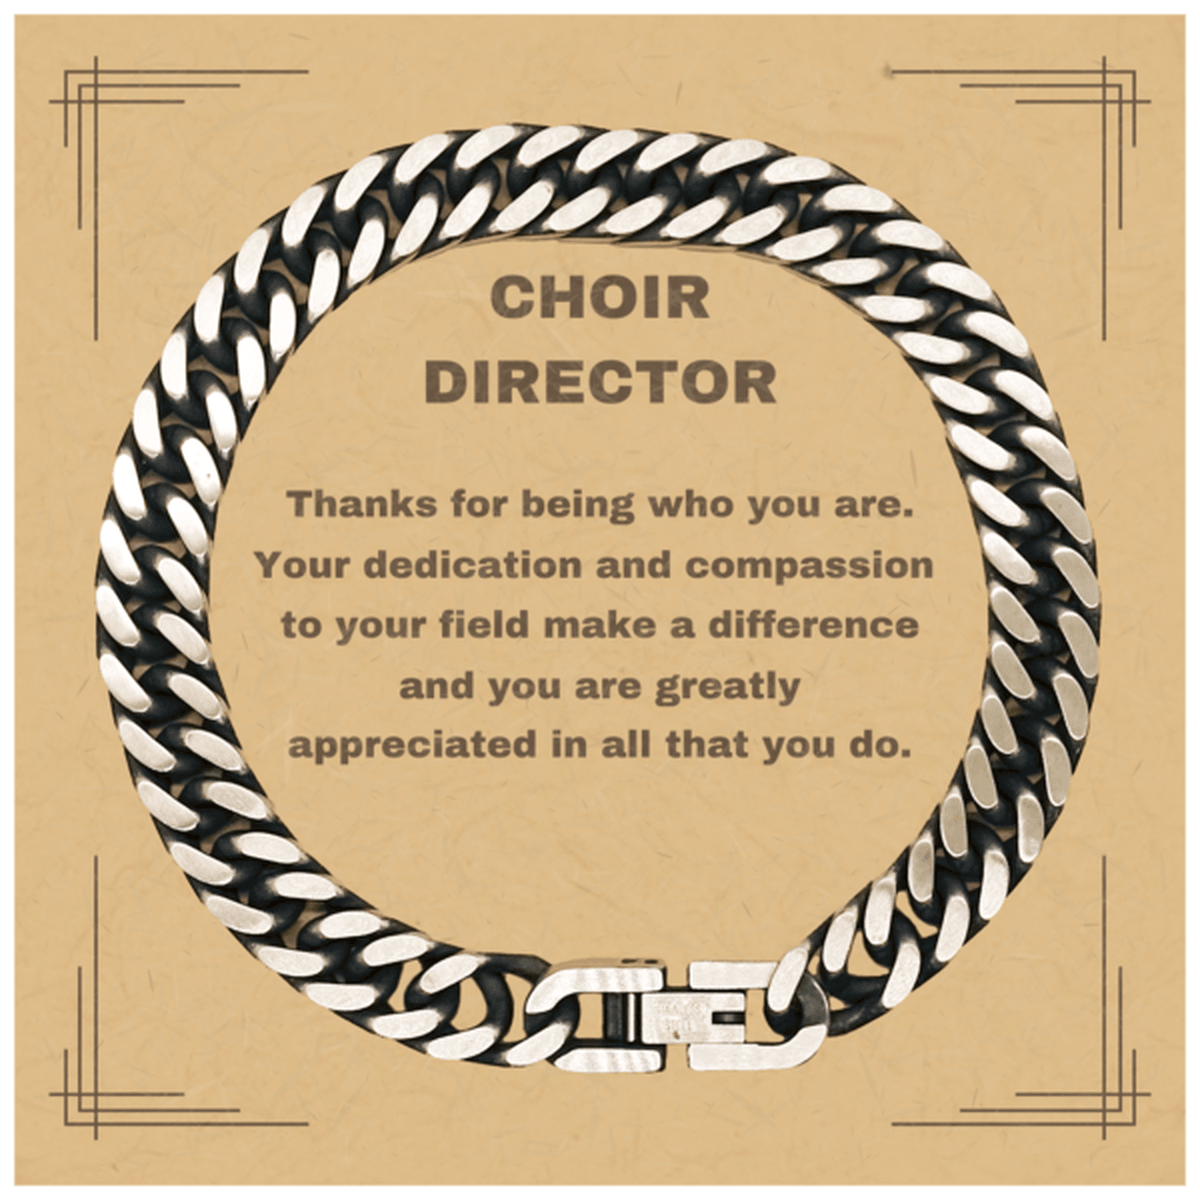 Choir DirectorCuban Chain Link Bracelet - Thanks for being who you are - Birthday Christmas Jewelry Gifts Coworkers Colleague Boss - Mallard Moon Gift Shop